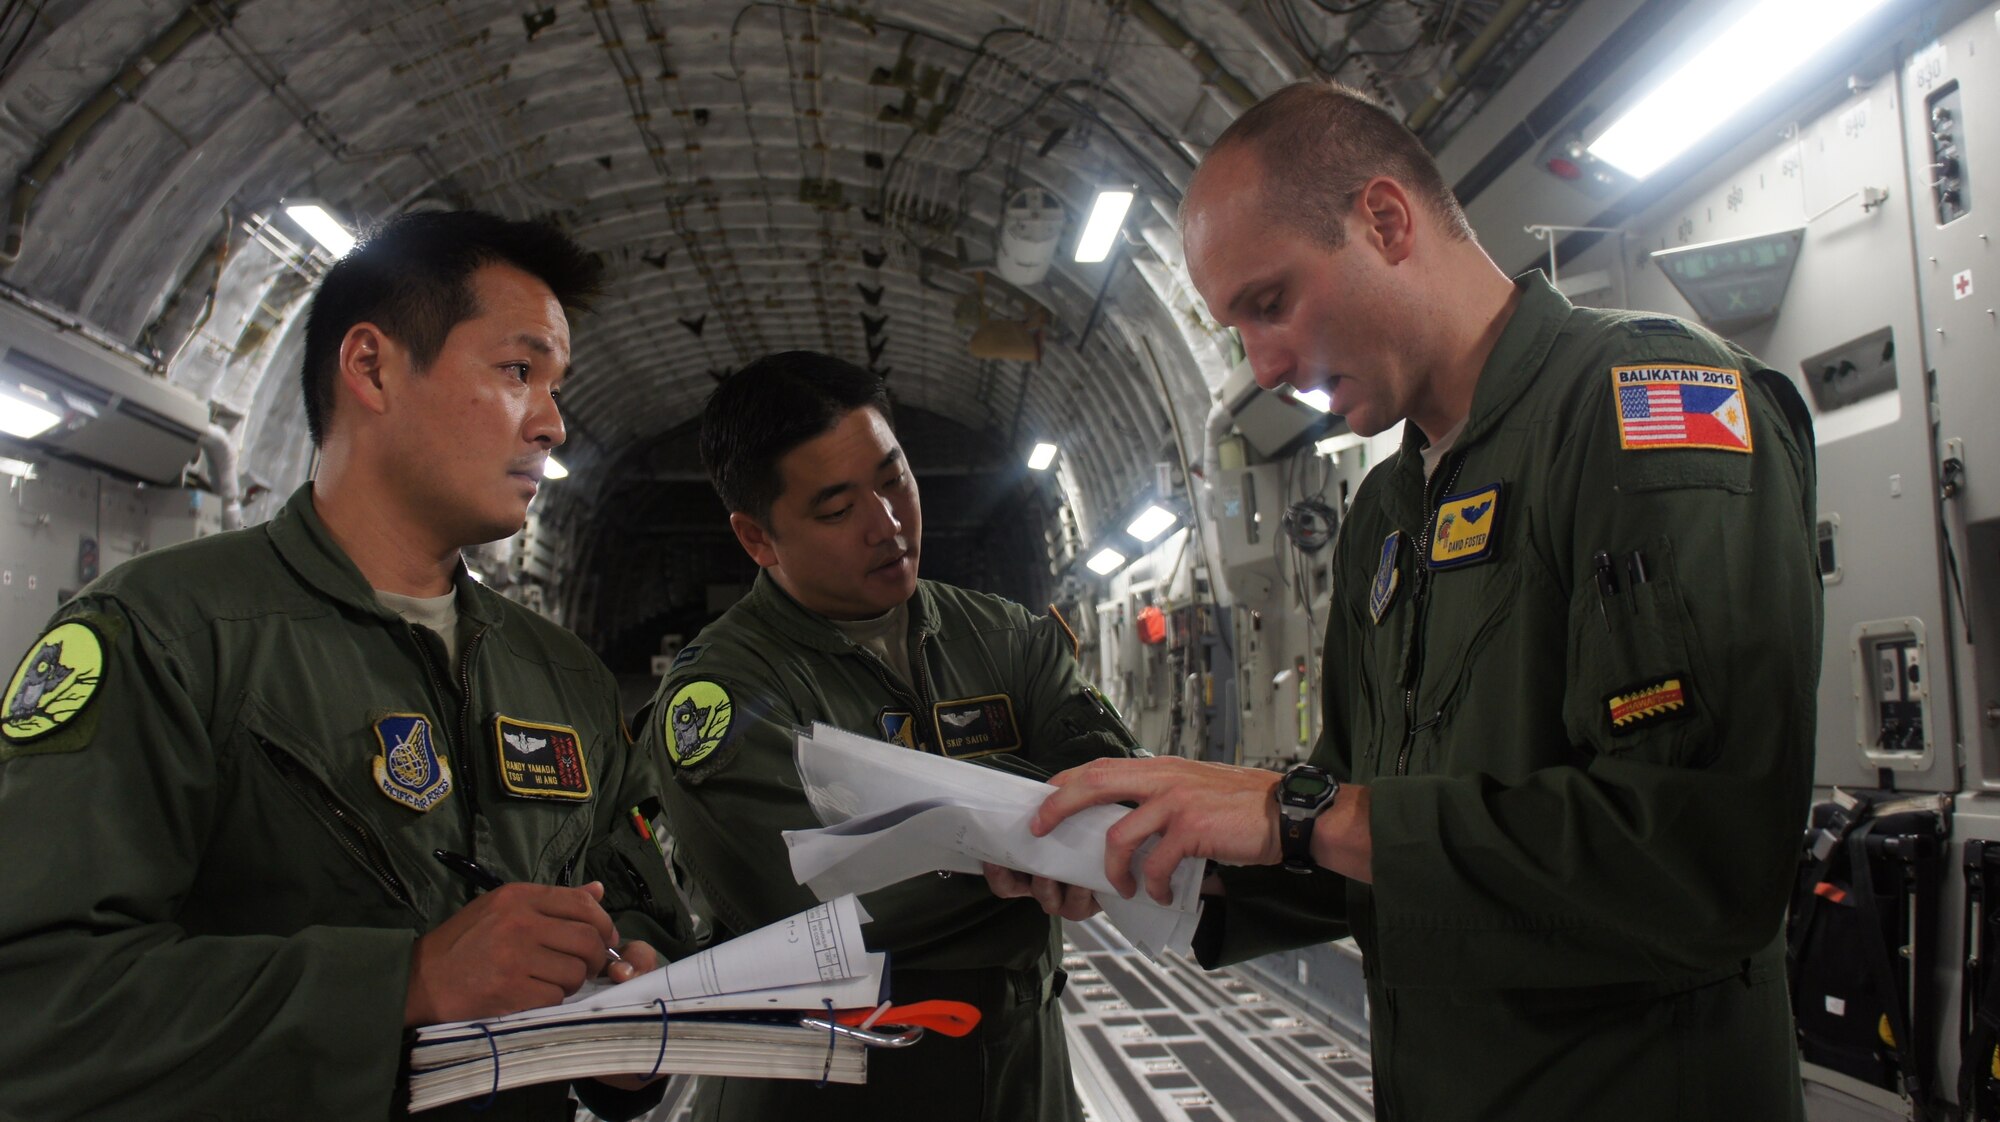 Capt. David Foster, 535th Airlift Squadron briefs air crew members Capt. Skip Saito and Loadmaster, Tech. Sgt. Randy Yamada on the day's air drop mission during Balikatan 2016, Clark Air Field, Philippines, April 15, 2016. Balikatan, which means shoulder to shoulder in Filipino, is an annual bilateral training exercise aimed at improving the ability of Philippine and U.S. military forces to work together during planning, contingency and humanitarian assistance and disaster relief operations. (U.S. Air National Guard photo by Tech. Sgt. Andrew Jackson/released)